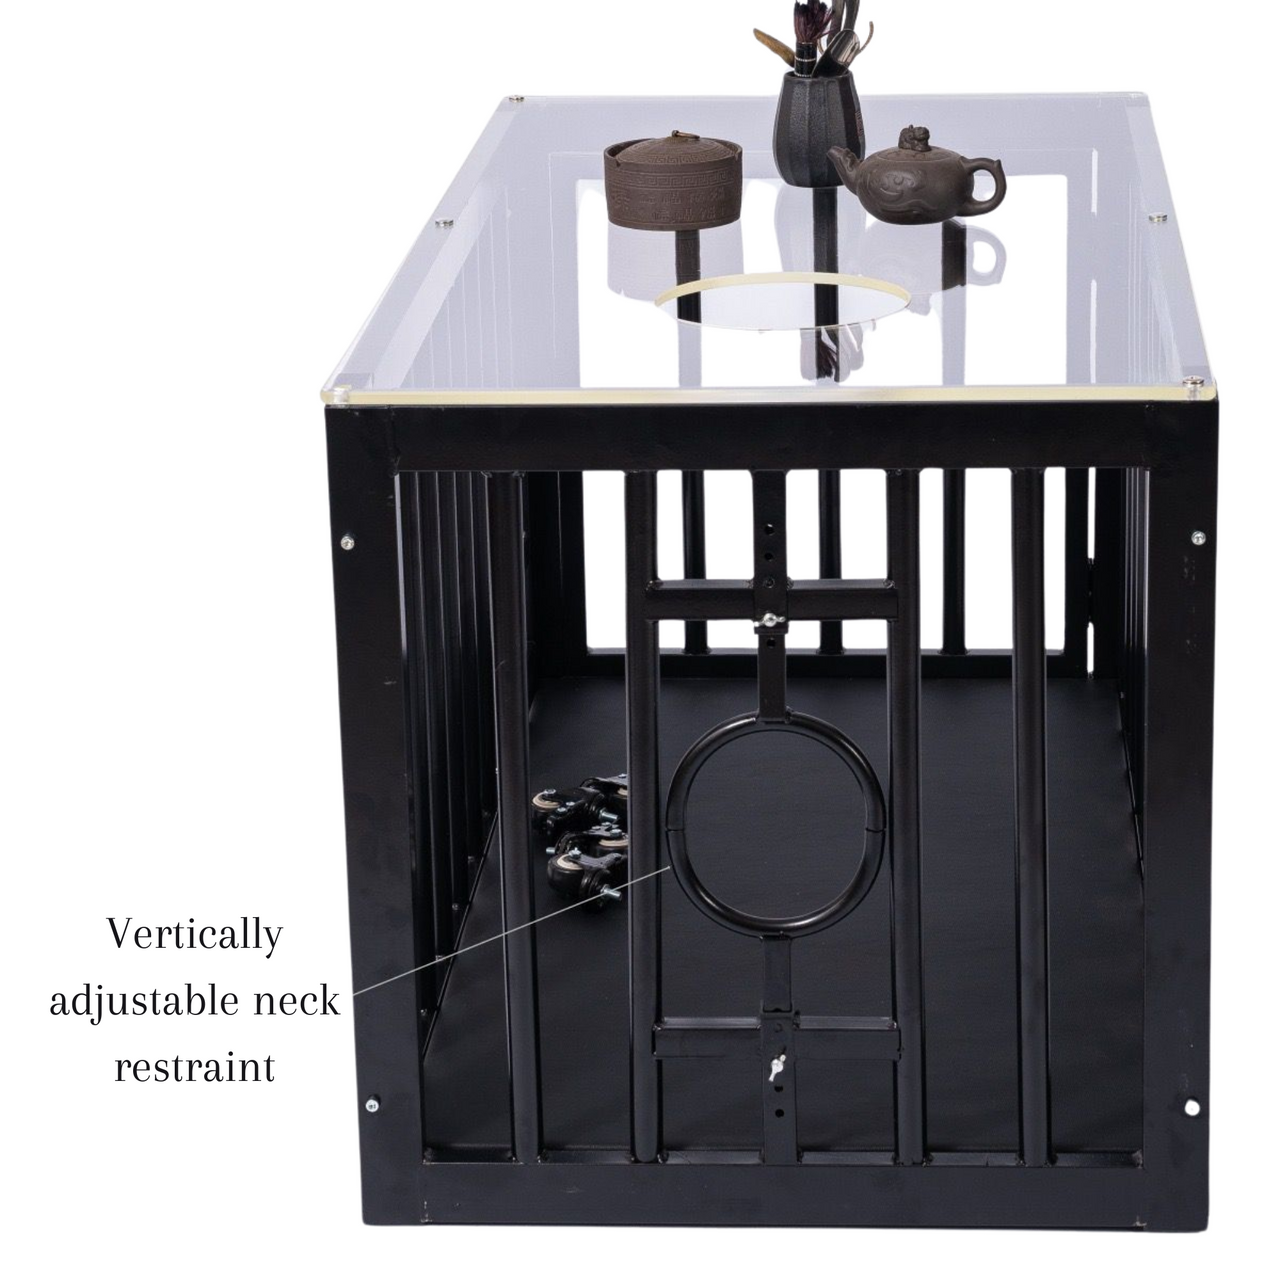 Roomsacred Black Steel Coffee Table BDSM Cage with Black Padded Floor & Clear Acrylic Top